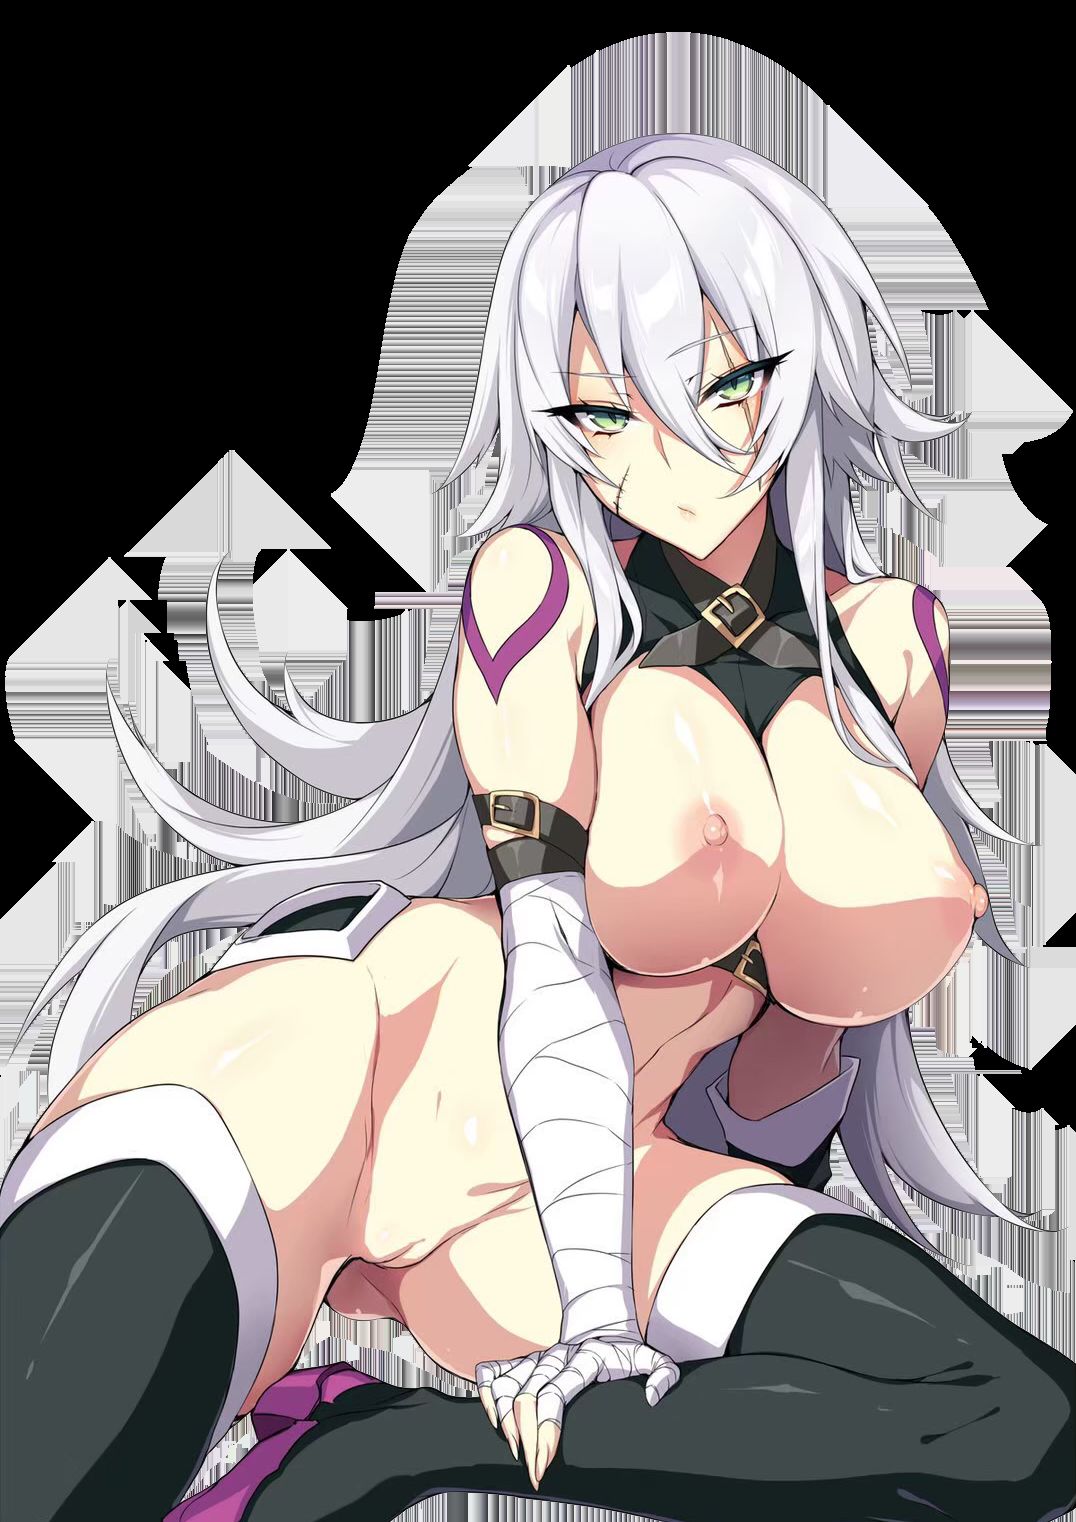 【Erocora Character Material】PNG background transparent erotic image such as anime characters Part 374 26